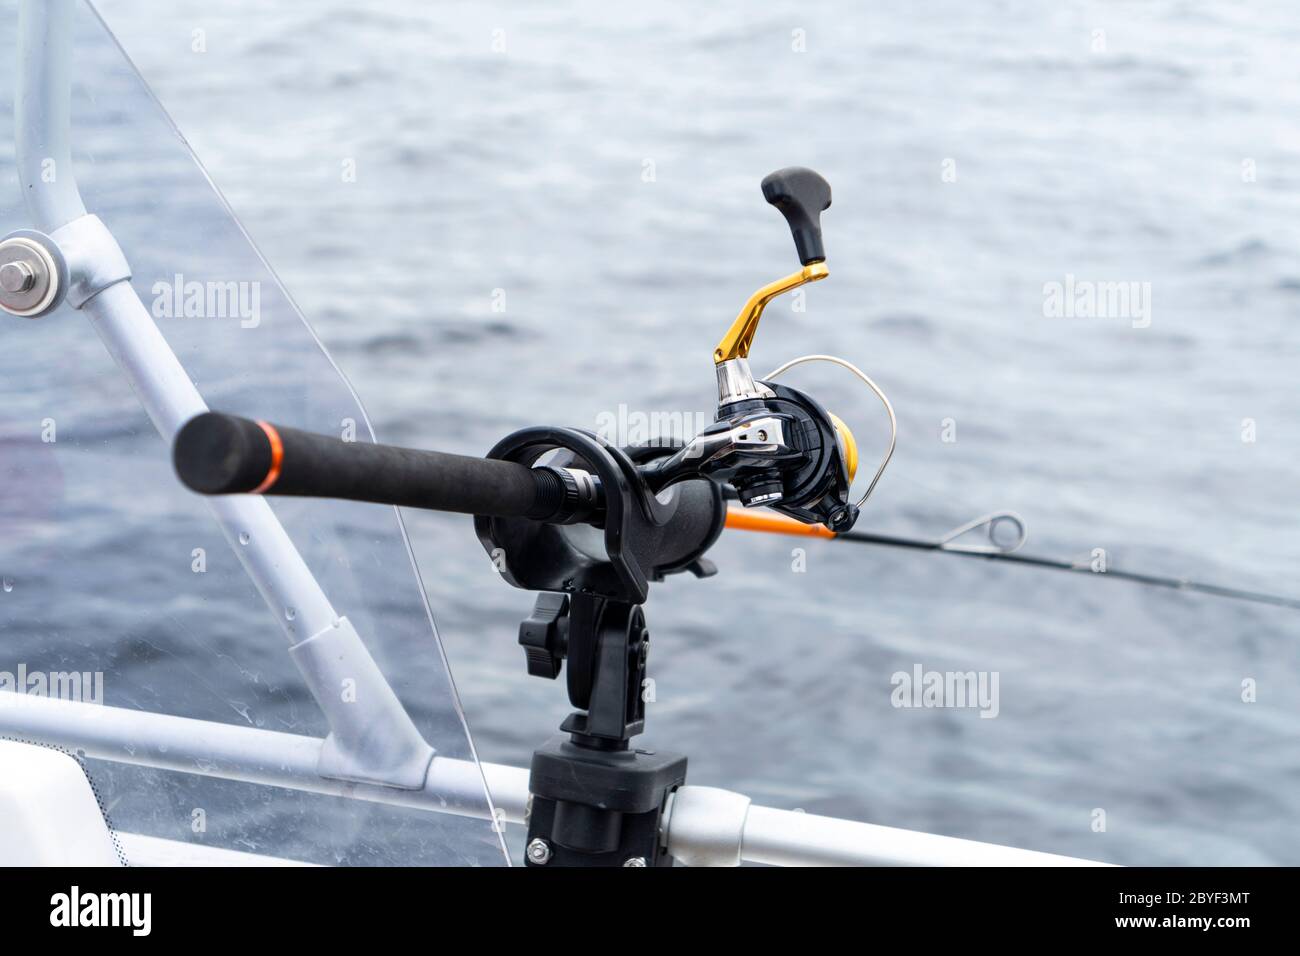 https://c8.alamy.com/comp/2BYF3MT/fishing-rod-spinning-with-the-line-close-up-fishing-rod-in-rod-holder-in-fishing-boat-fishing-rod-rings-fishing-tackle-fishing-spinning-reel-2BYF3MT.jpg